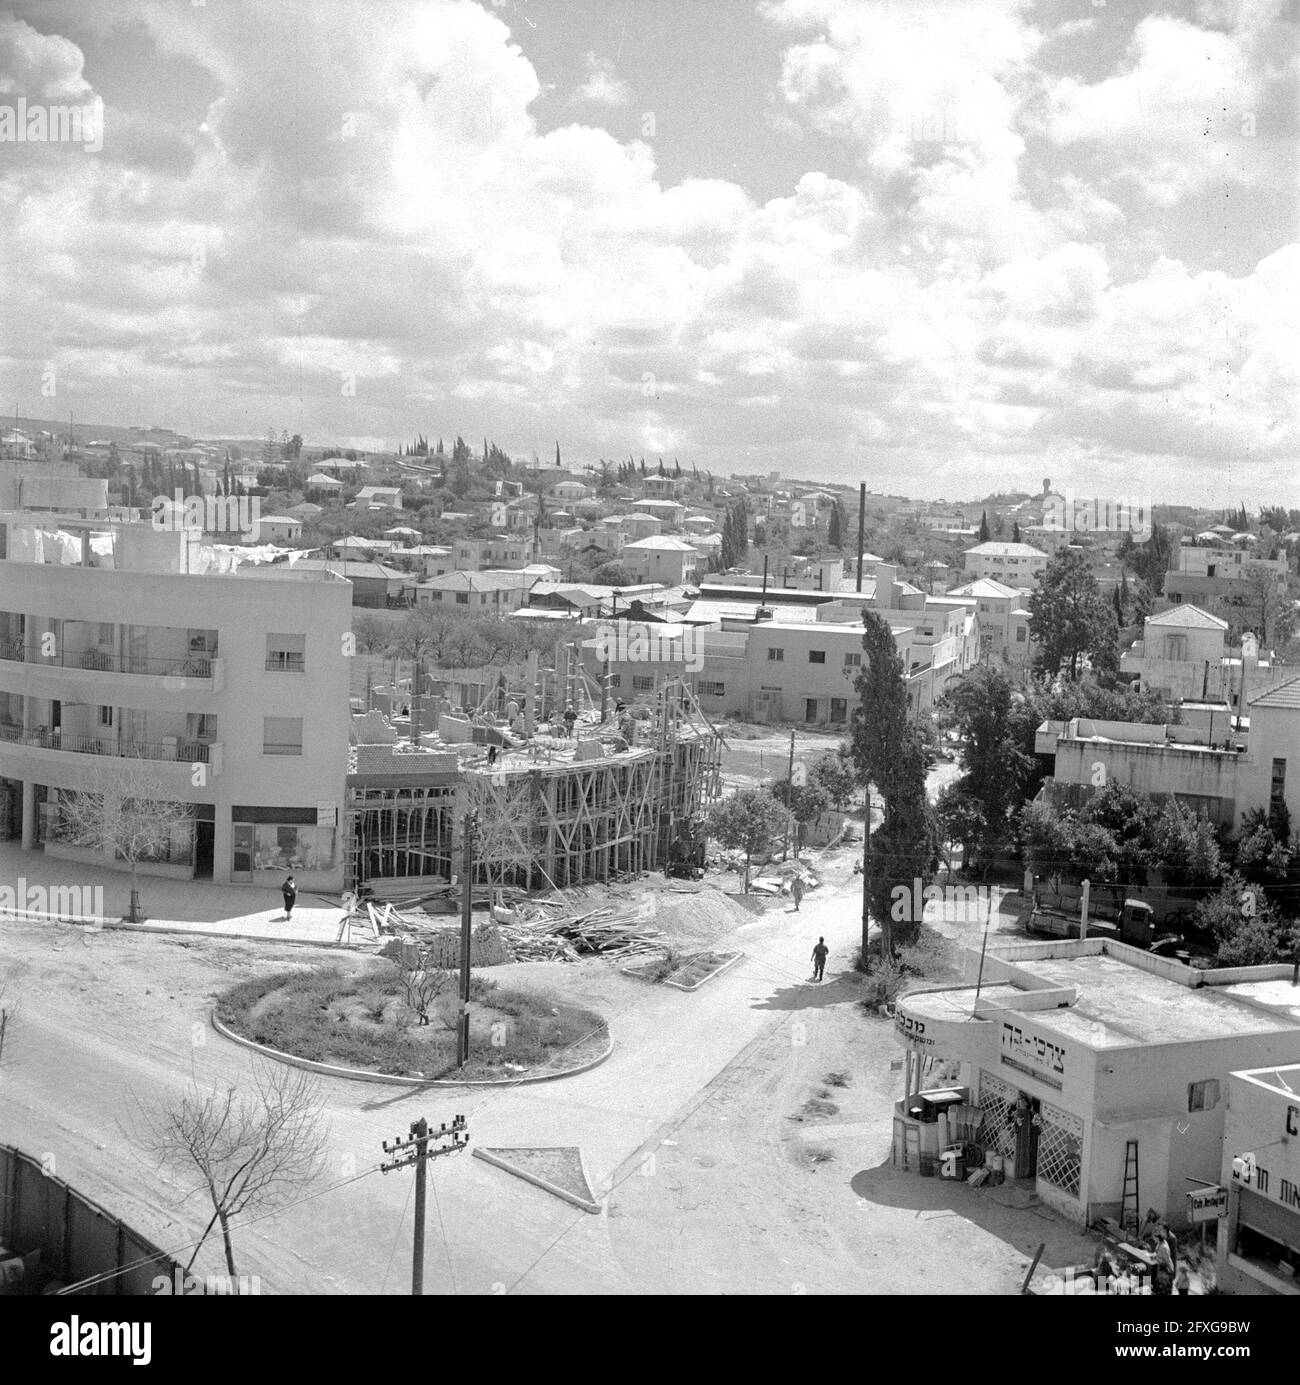 Traffic plaza near the Assis citrus juice factory on the Tel Aviv to Haifa road with stores, flats and a complex under construction. January 1, 1948, The Netherlands, 20th century press agency photo, news to remember, documentary, historic photography 1945-1990, visual stories, human history of the Twentieth Century, capturing moments in time Stock Photo